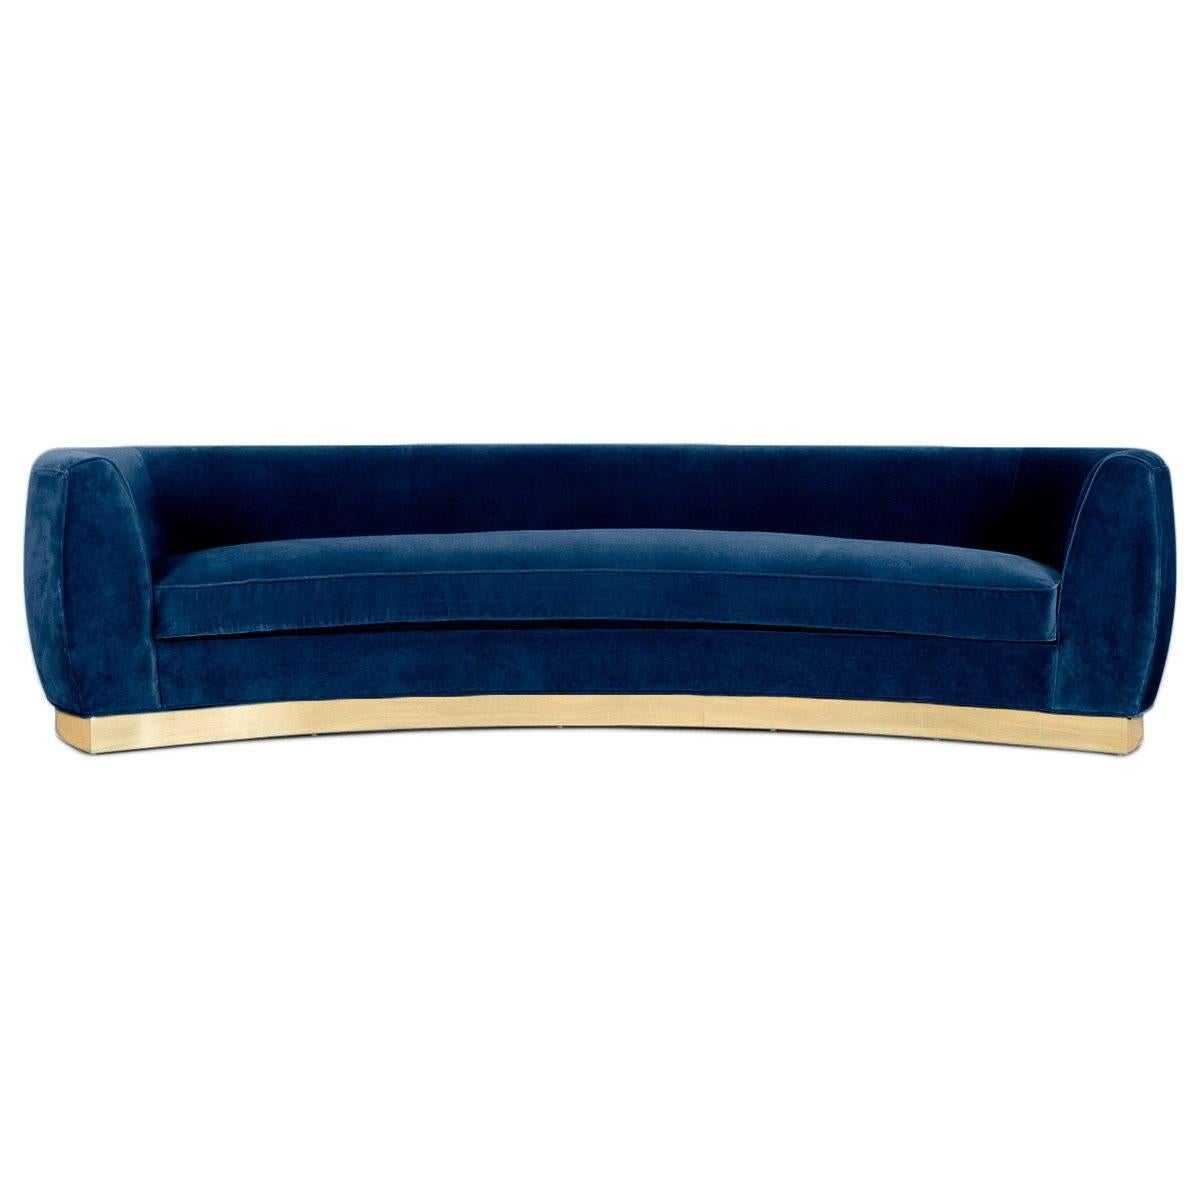 Art Deco Style Curved Sofa in Velvet Upholstery with Brass Toe-kick Base 10 foot For Sale 10